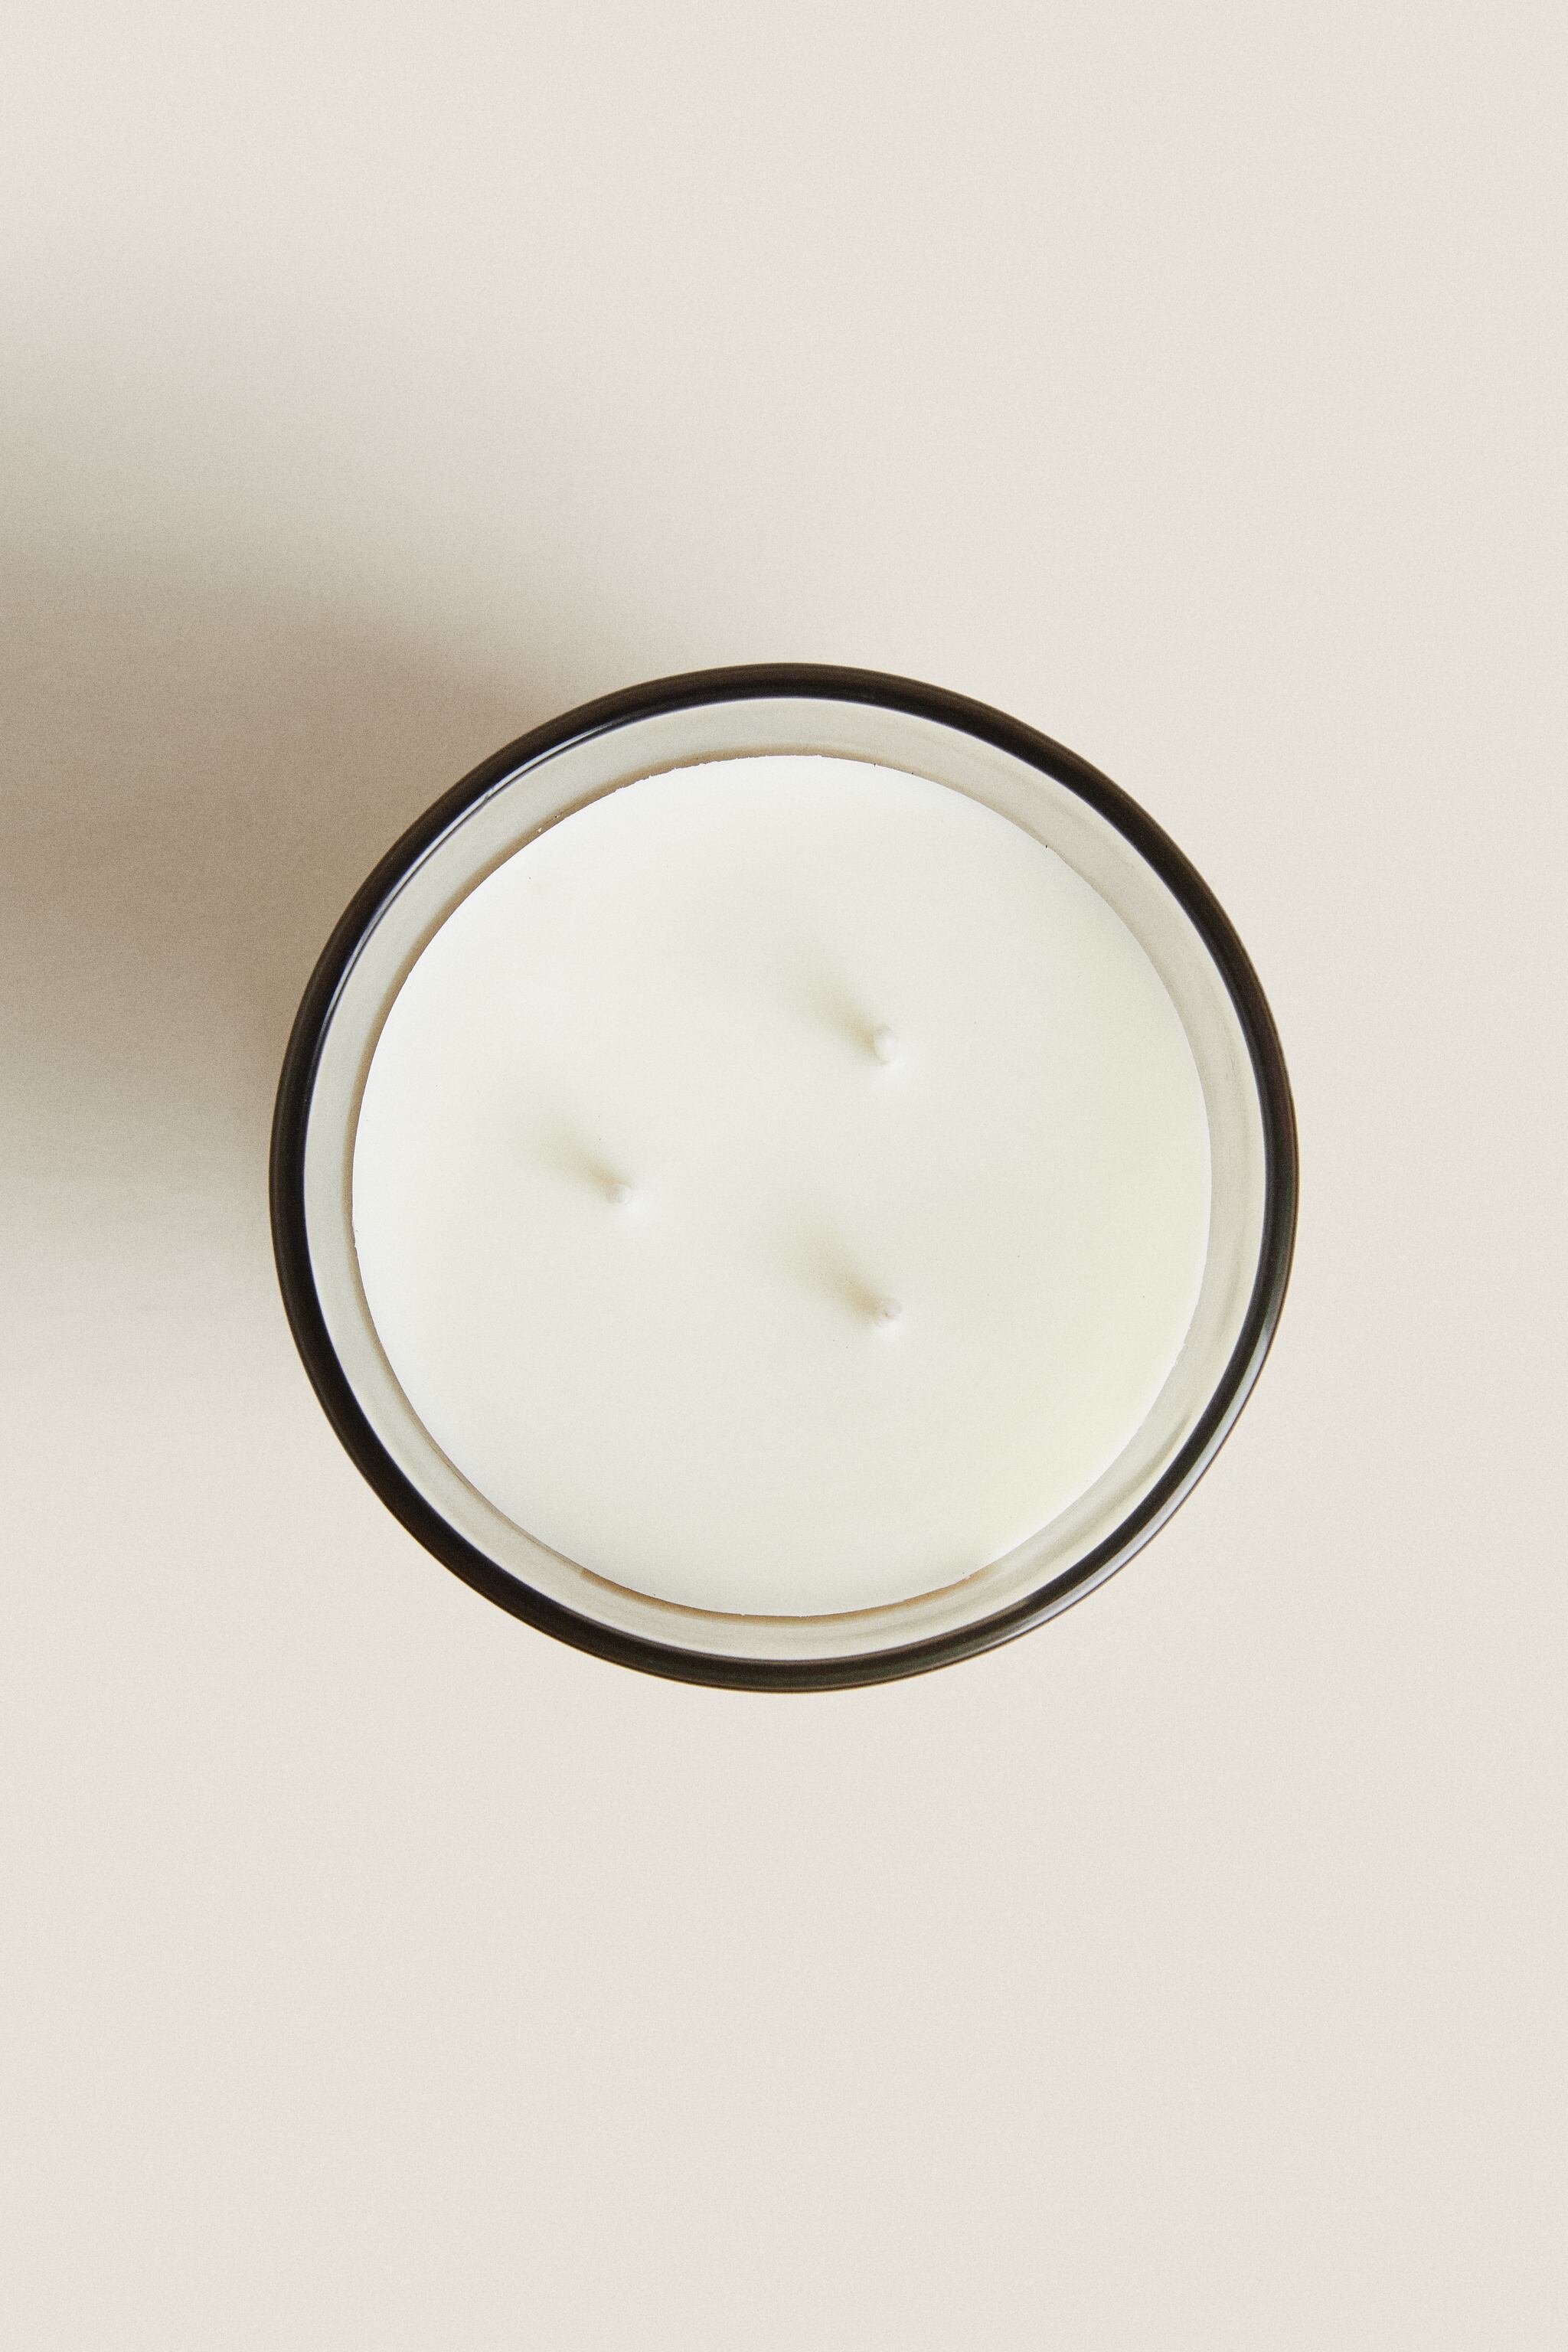 G) ABSOLUTE LINEN SCENTED CANDLE